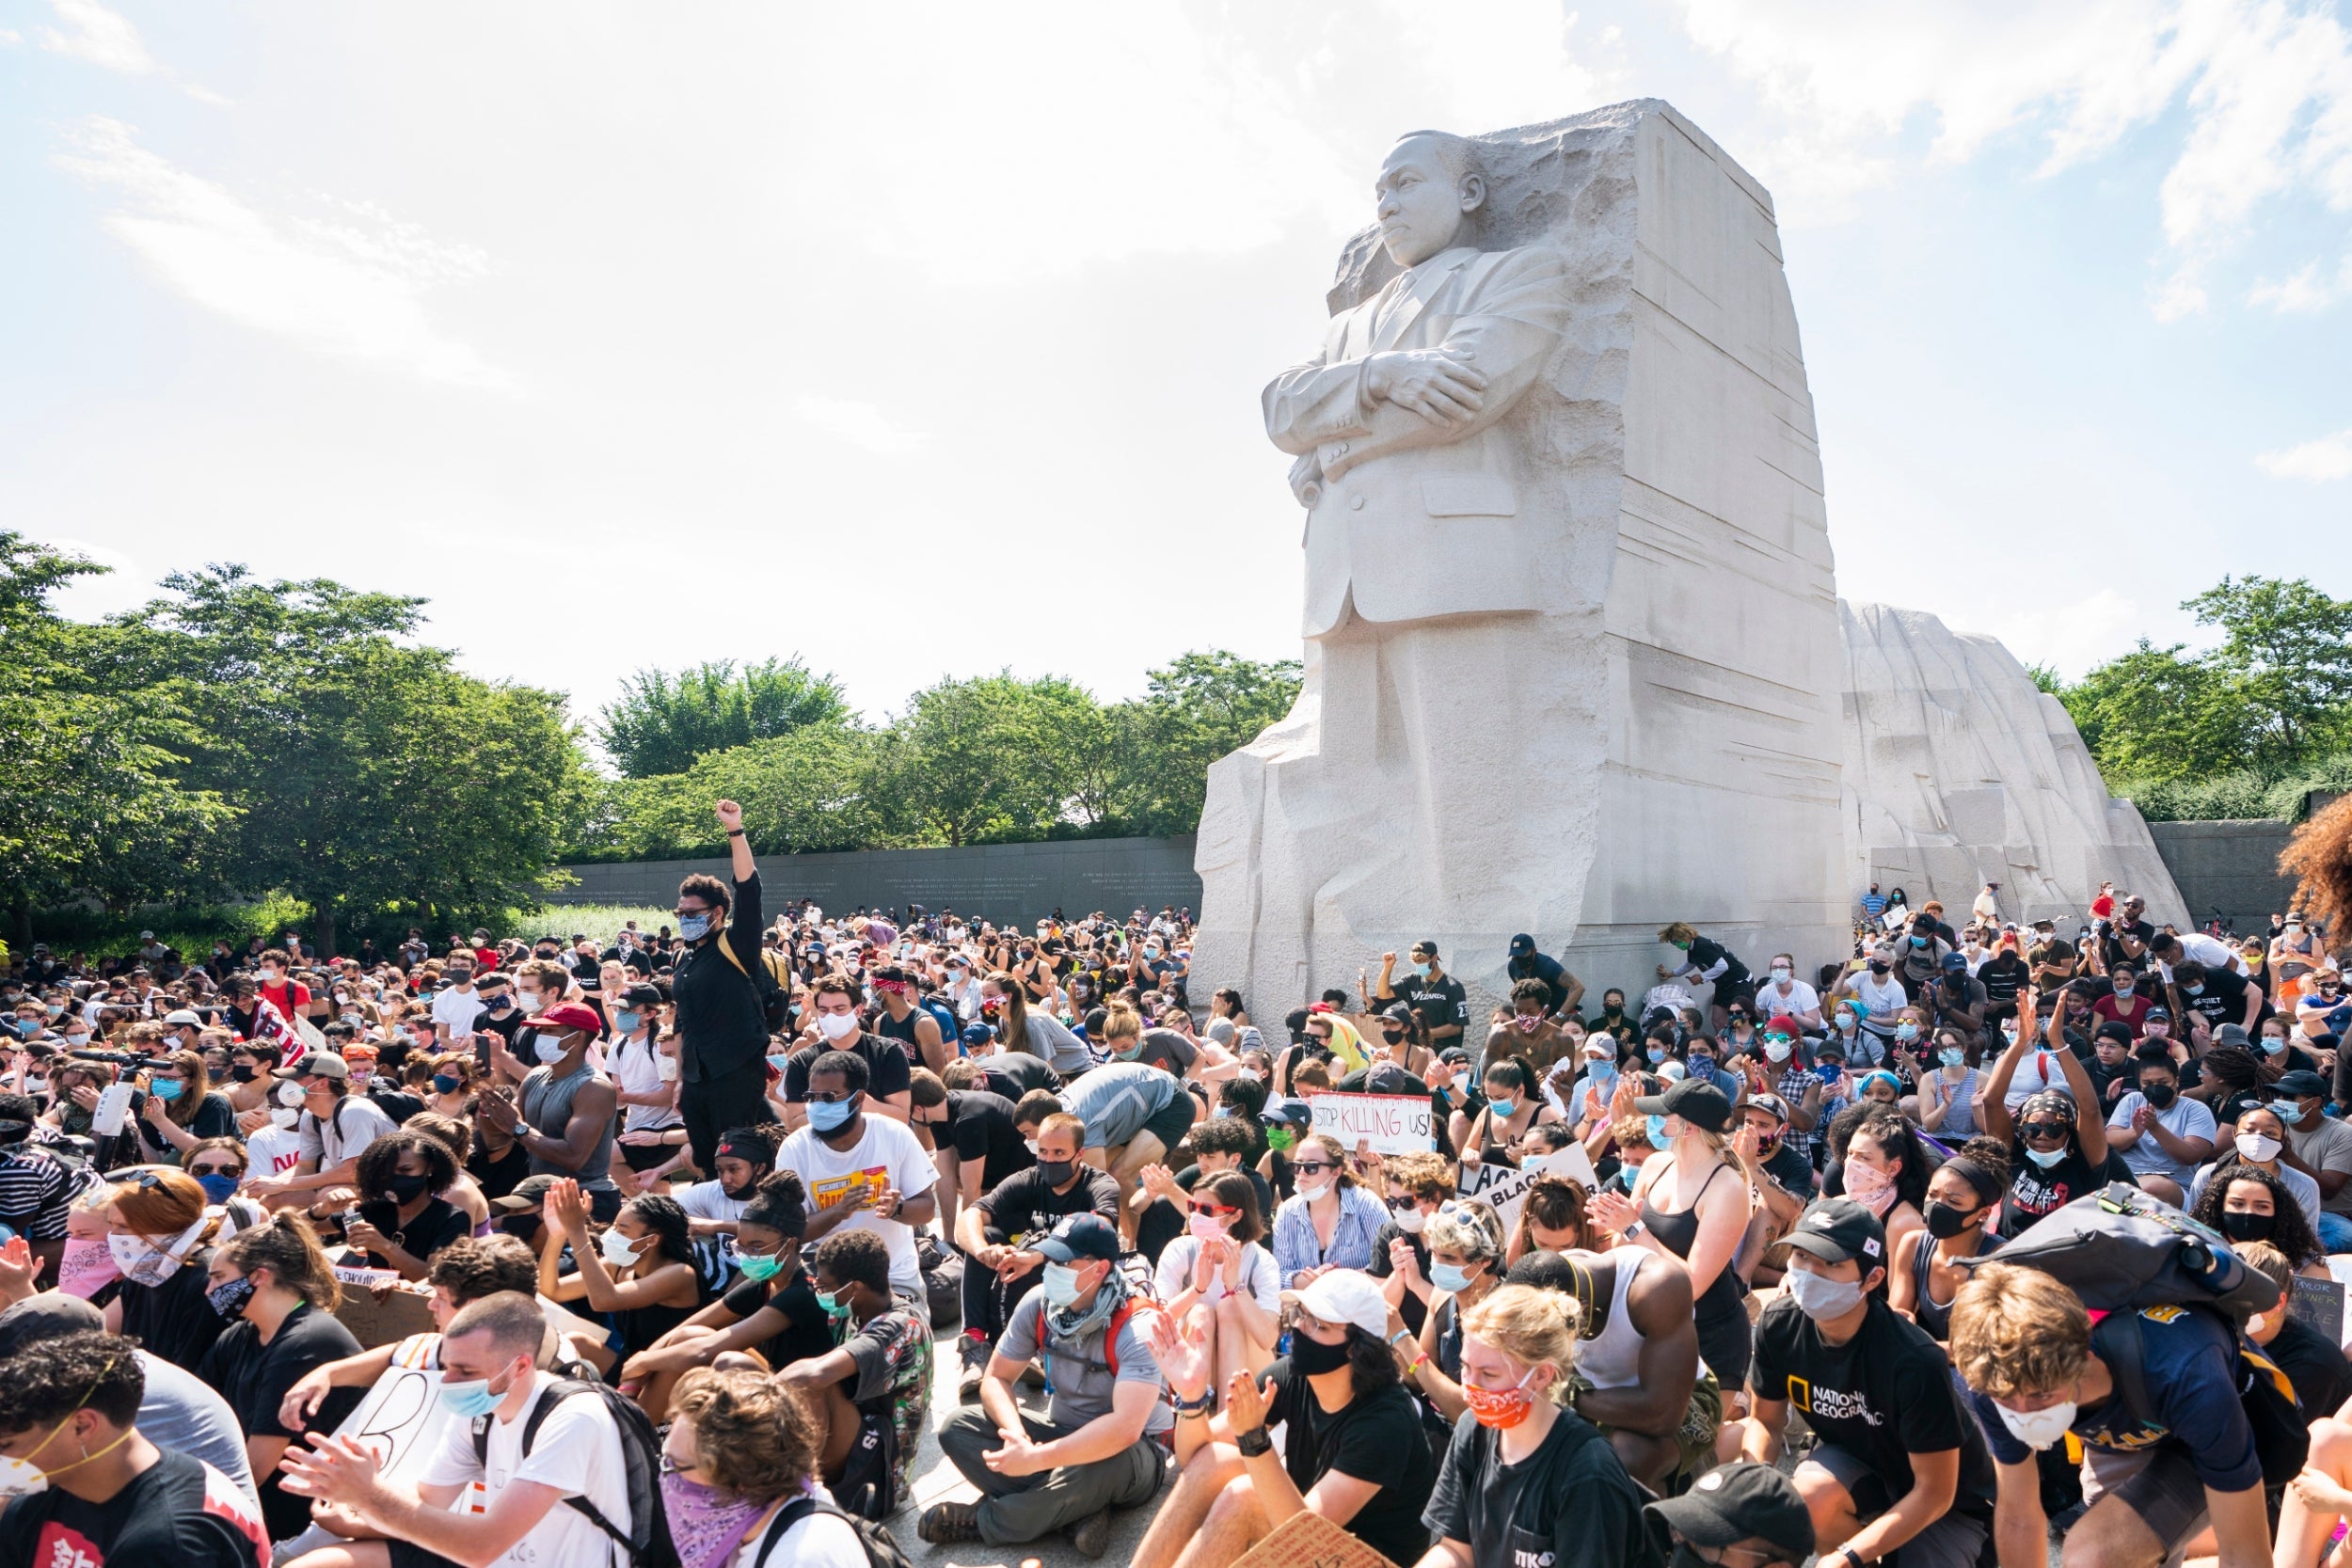 A Black Lives Matter protest at the Martin Luther King Memorial on the seventh day of protests in DC over the death of George Floyd